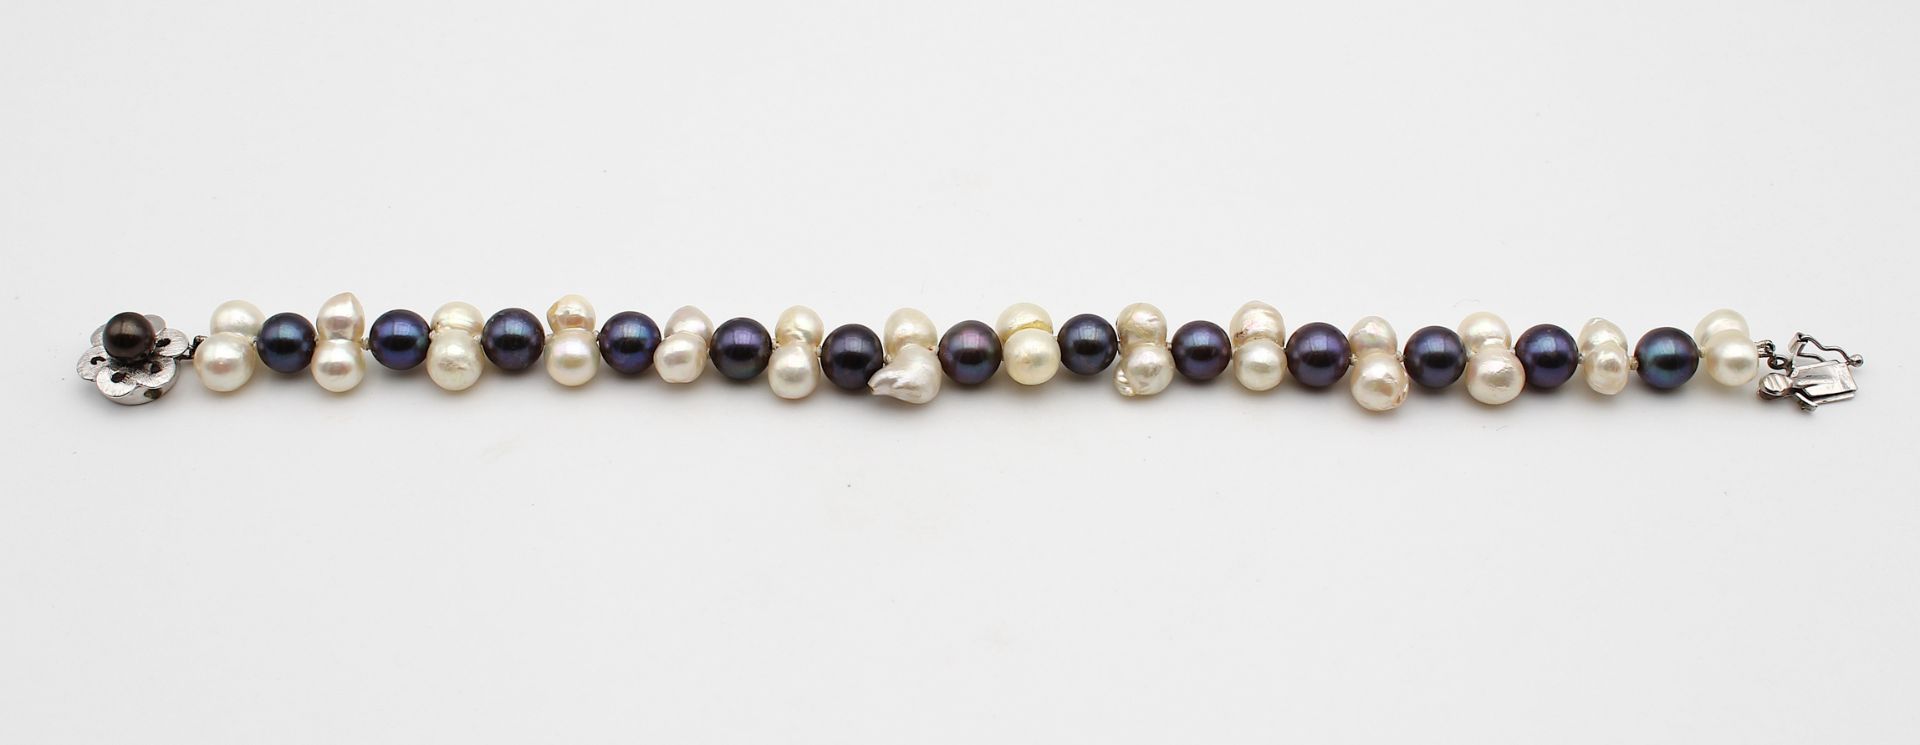 Special bracelet with cultured pearls - Image 3 of 3